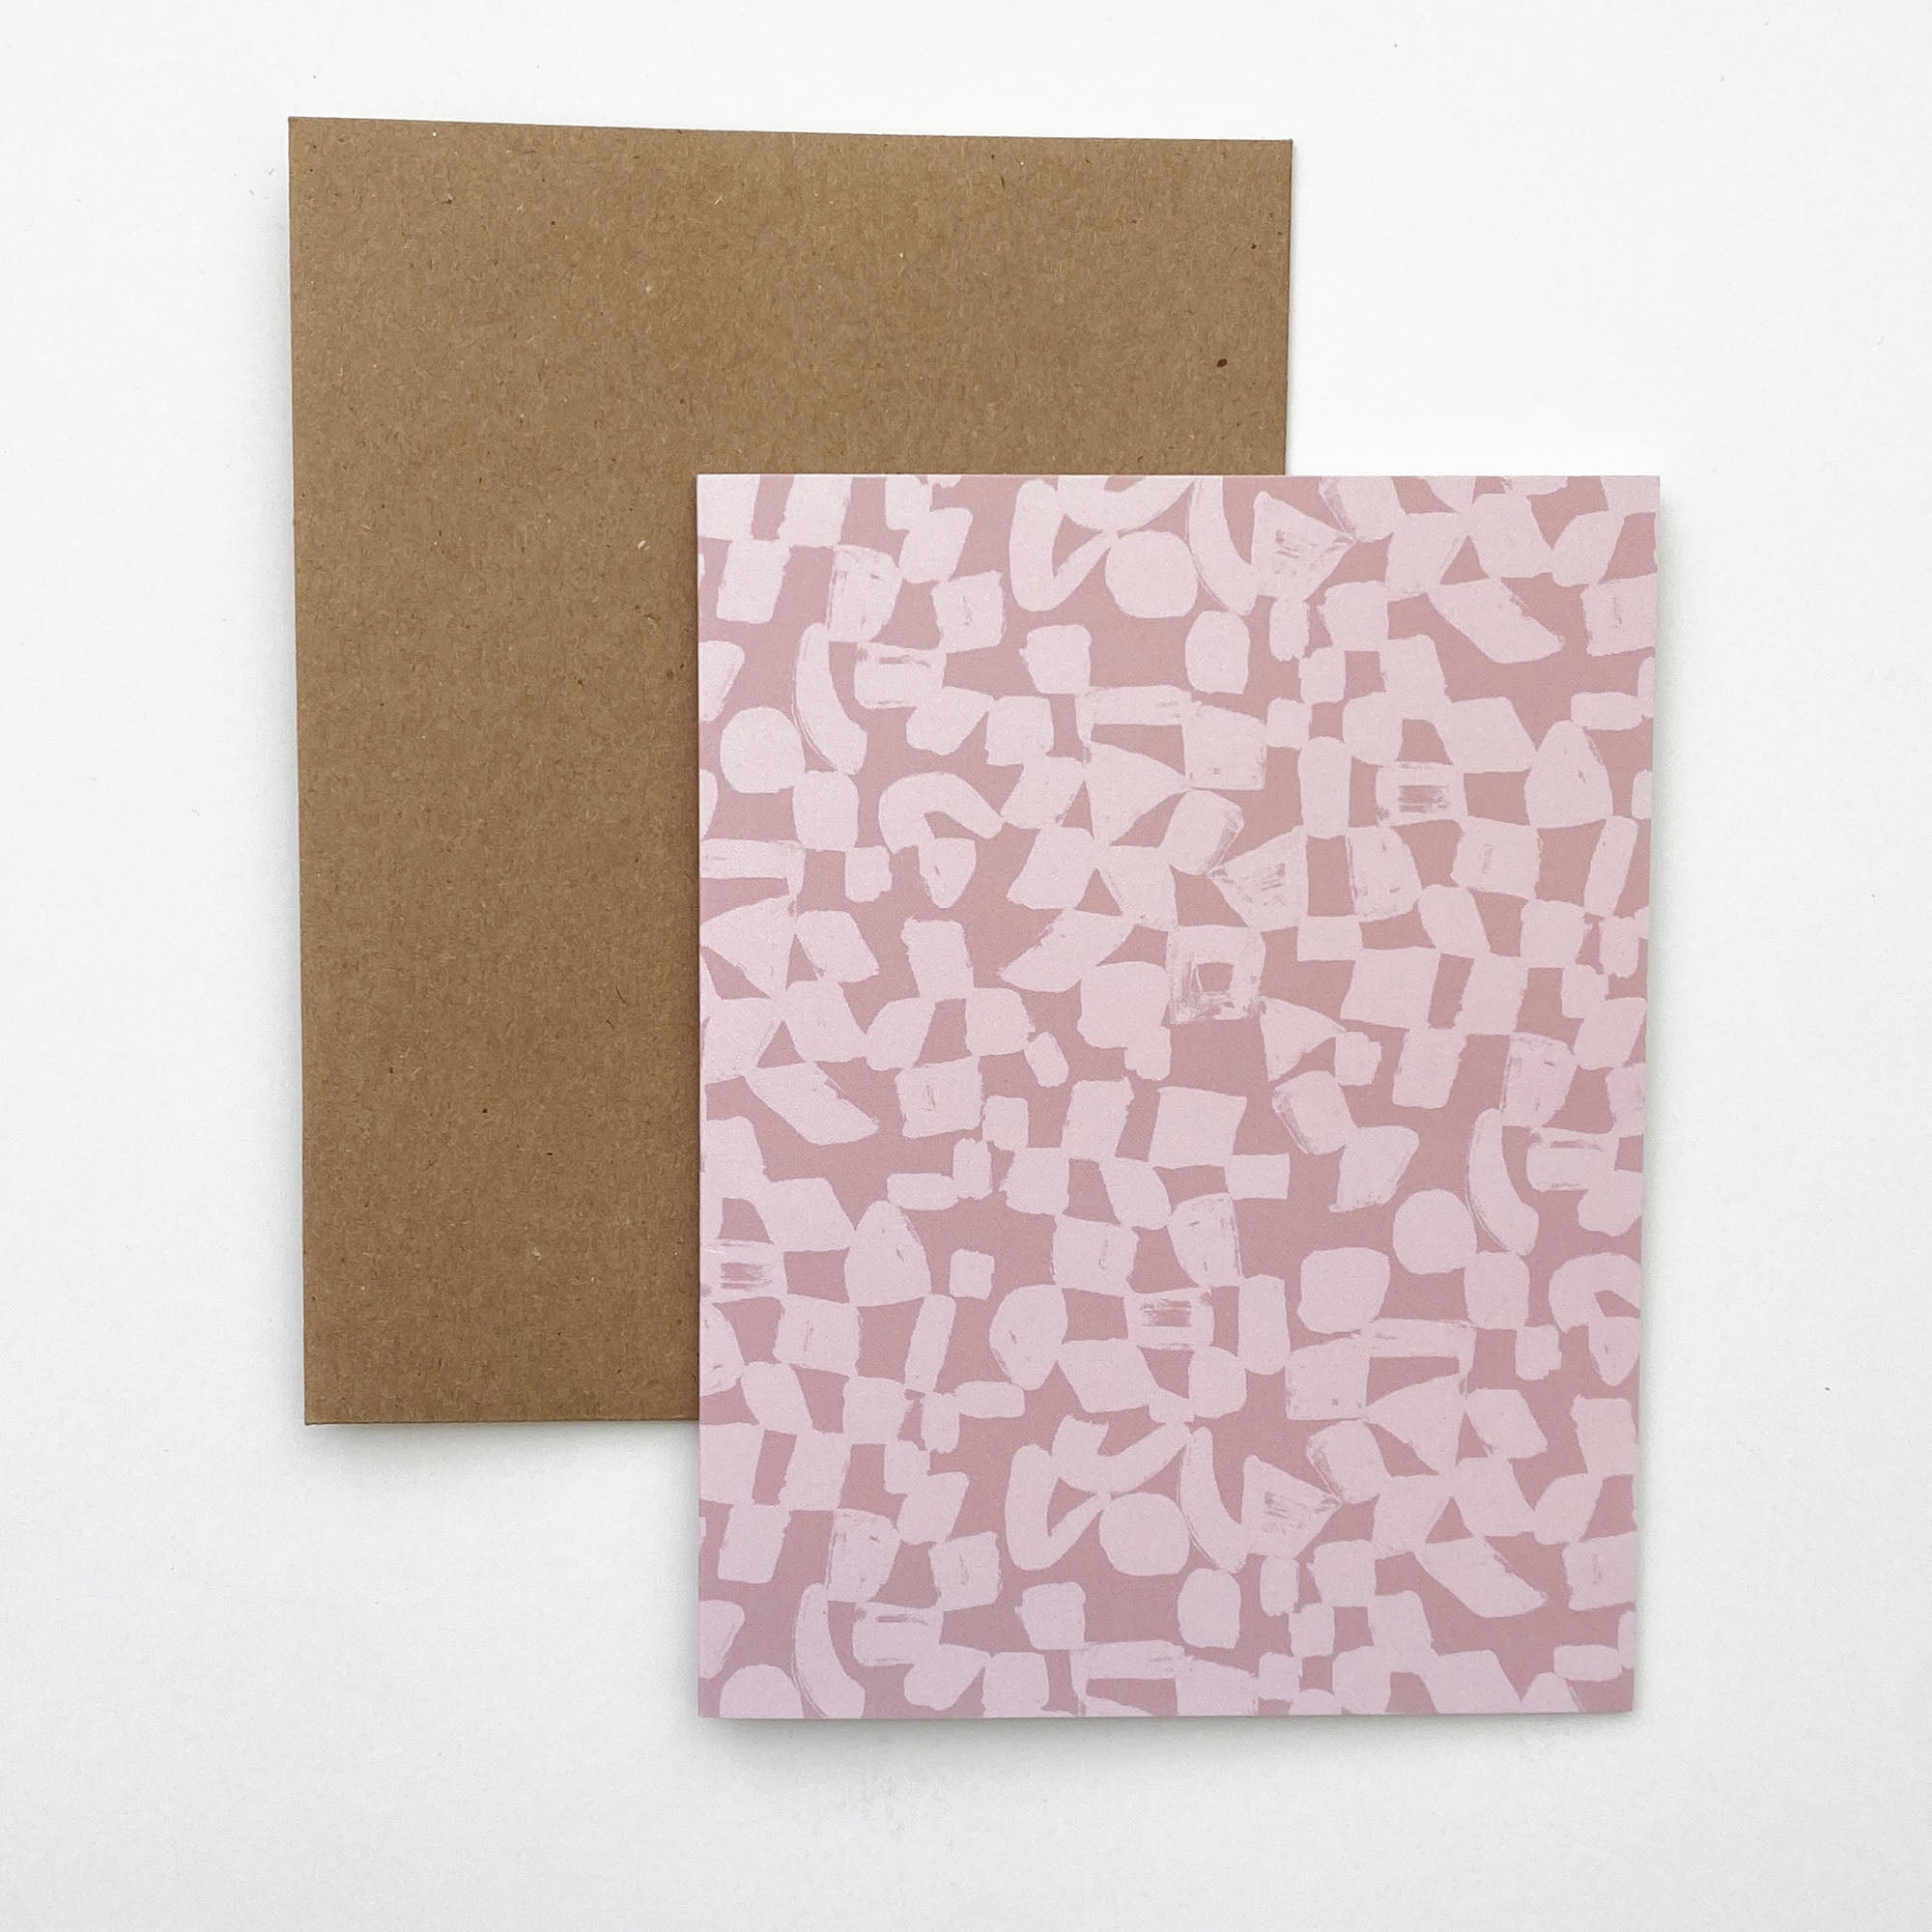 Greeting Card Set - Checks in Earthy Greens and Dusty Mauves